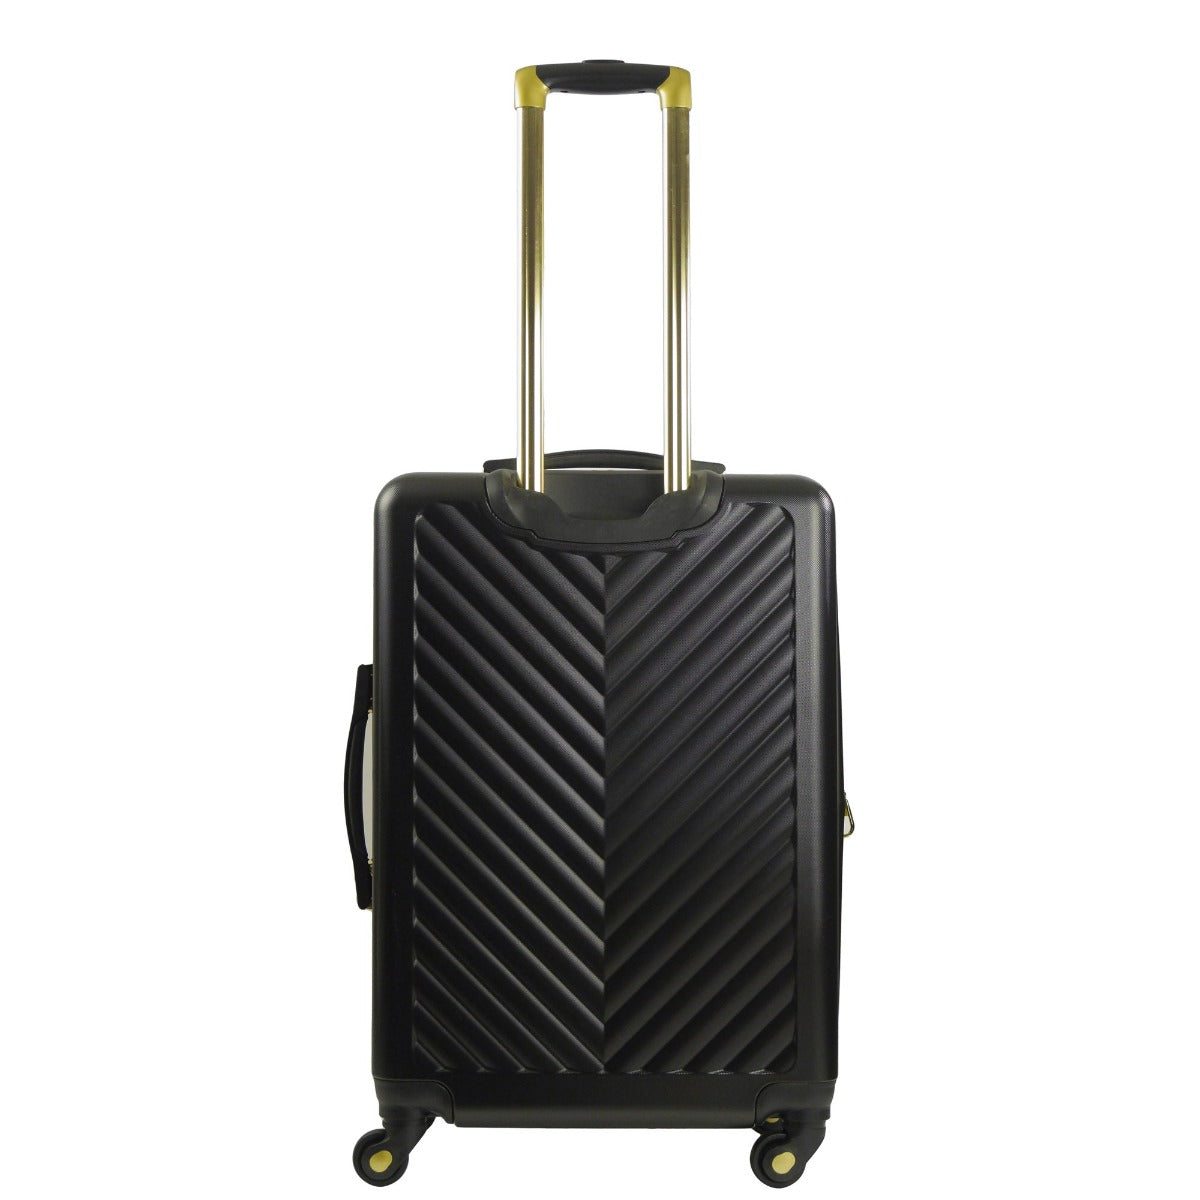 Christian Siriano Addie 25" hardside spinner luggage black - best checked suitcase for travelling